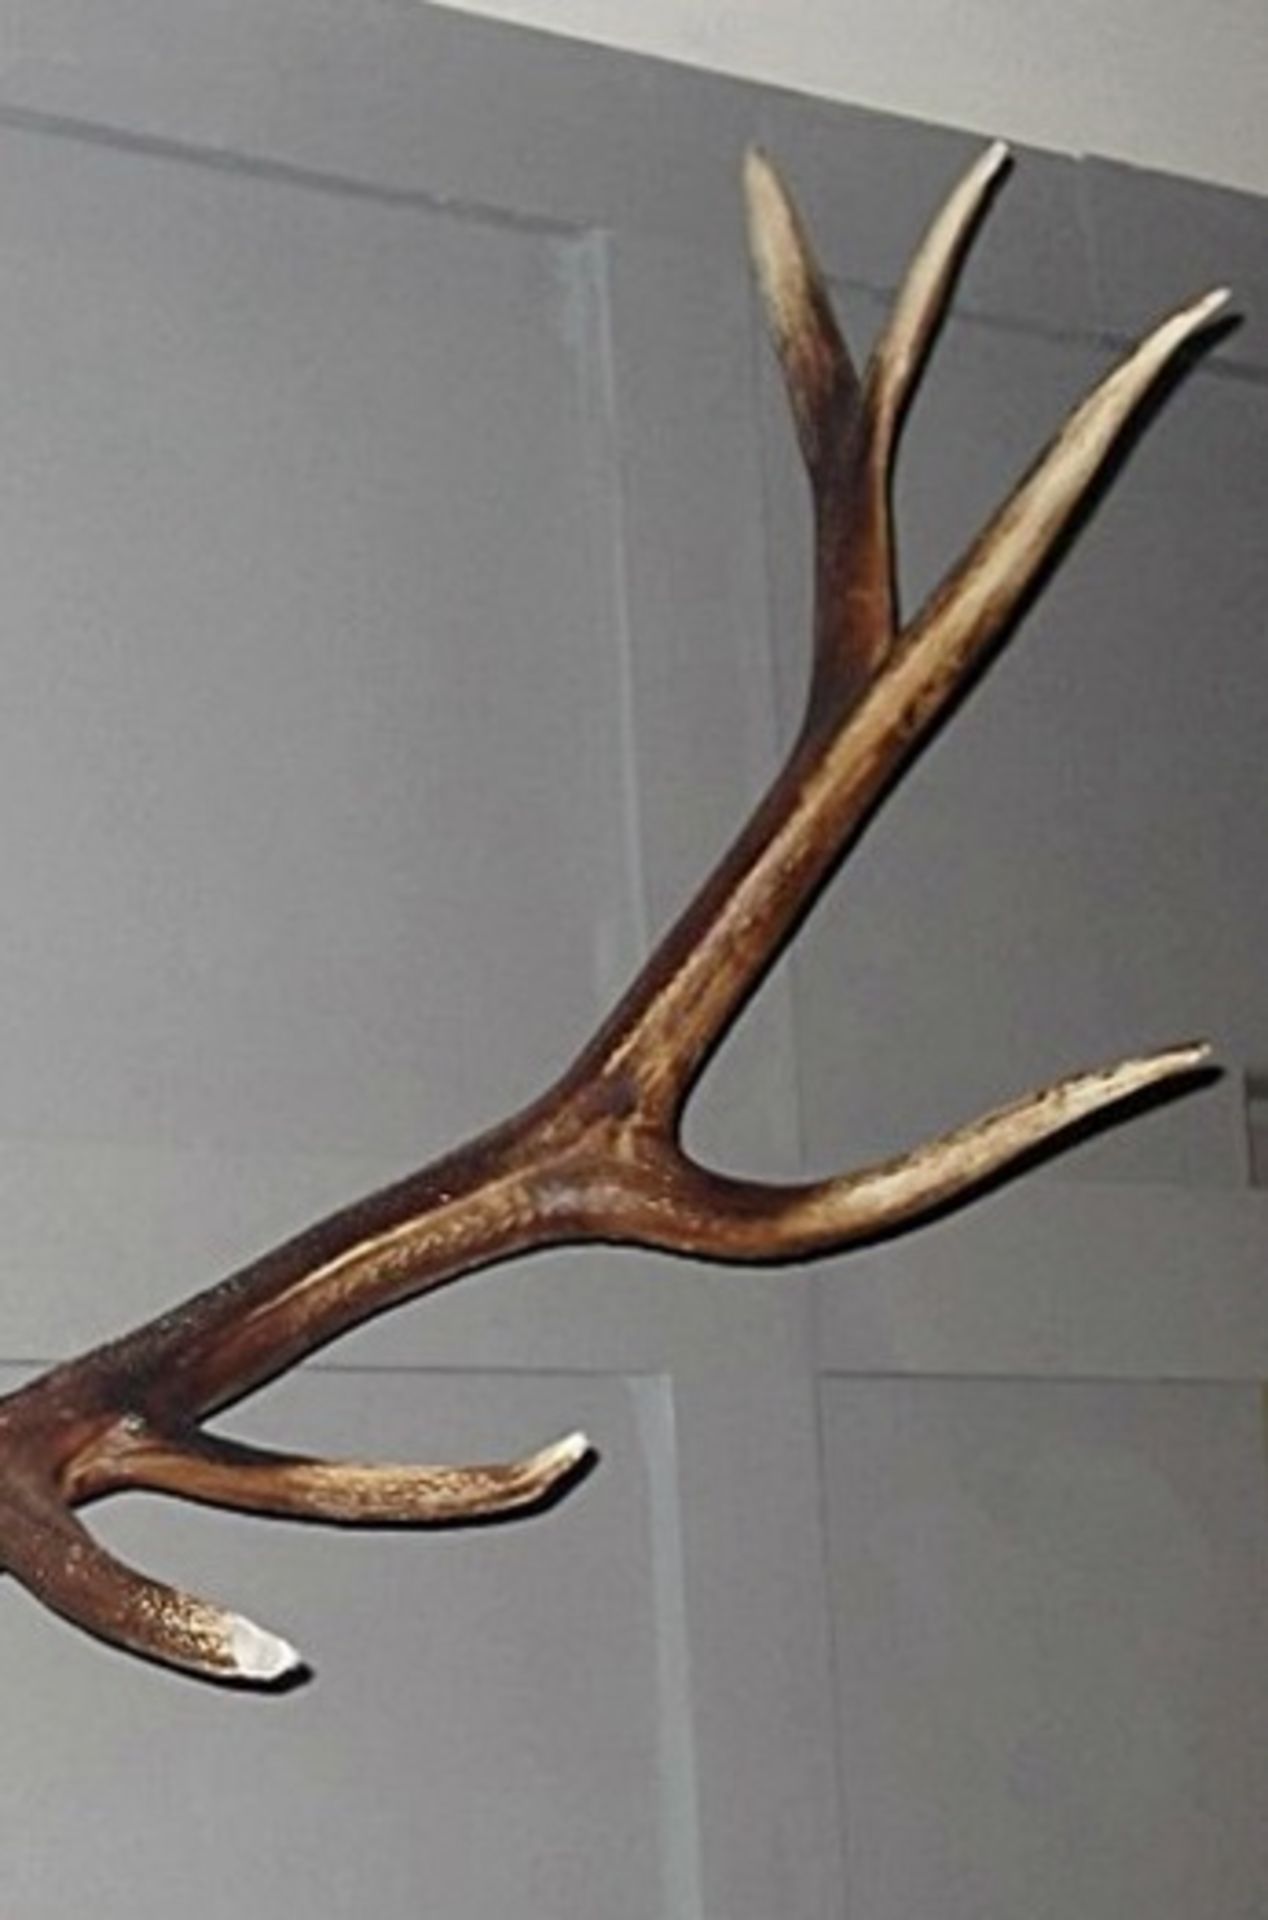 1 x Trophy Deer Skull Wall - Art Decoration - New / Unused Stock - Very Realistic Faux - Image 3 of 4